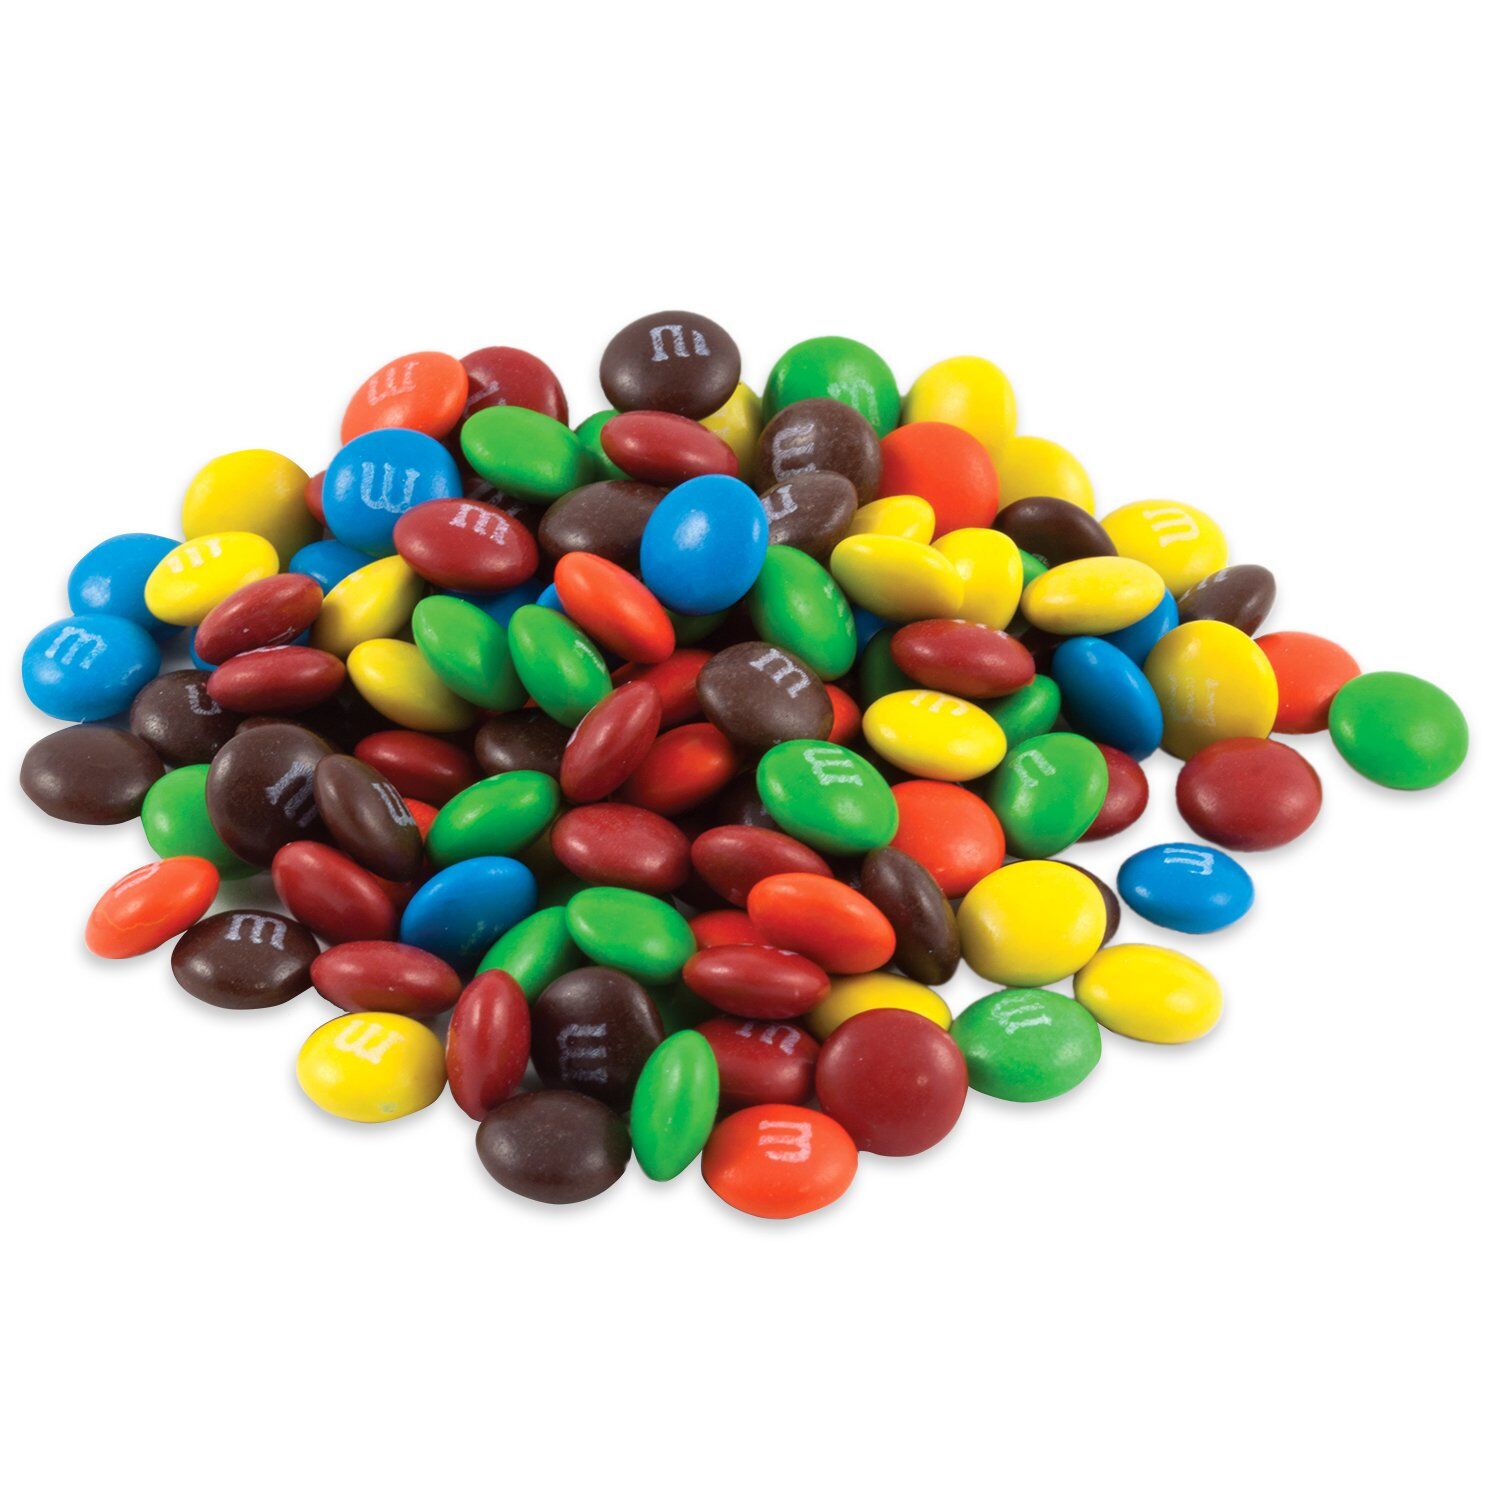 M&M's Crispy are coming back! - Los Angeles Times